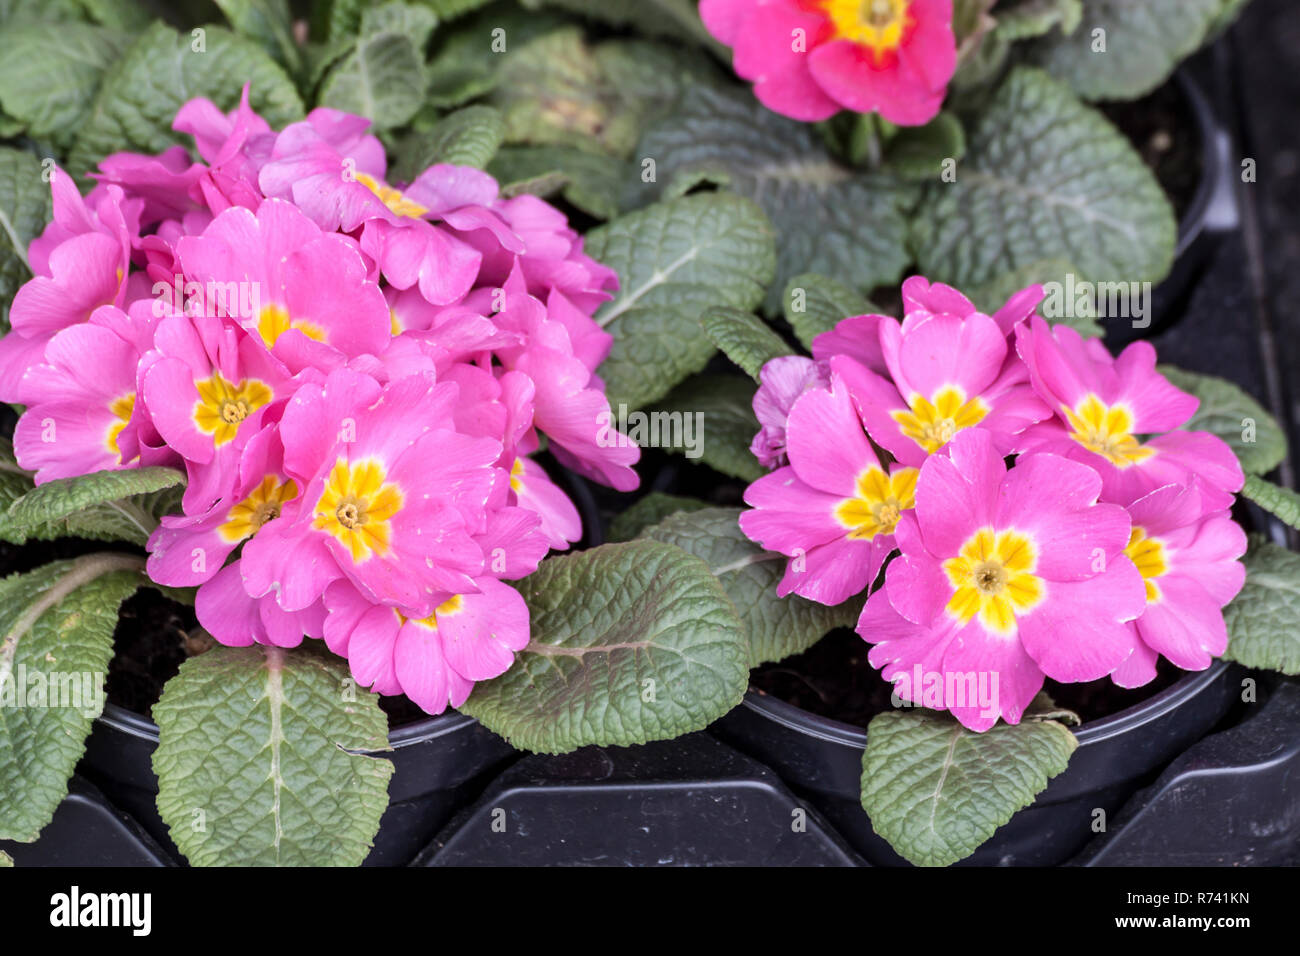 Pink primrose flower in a pot Stock Photo